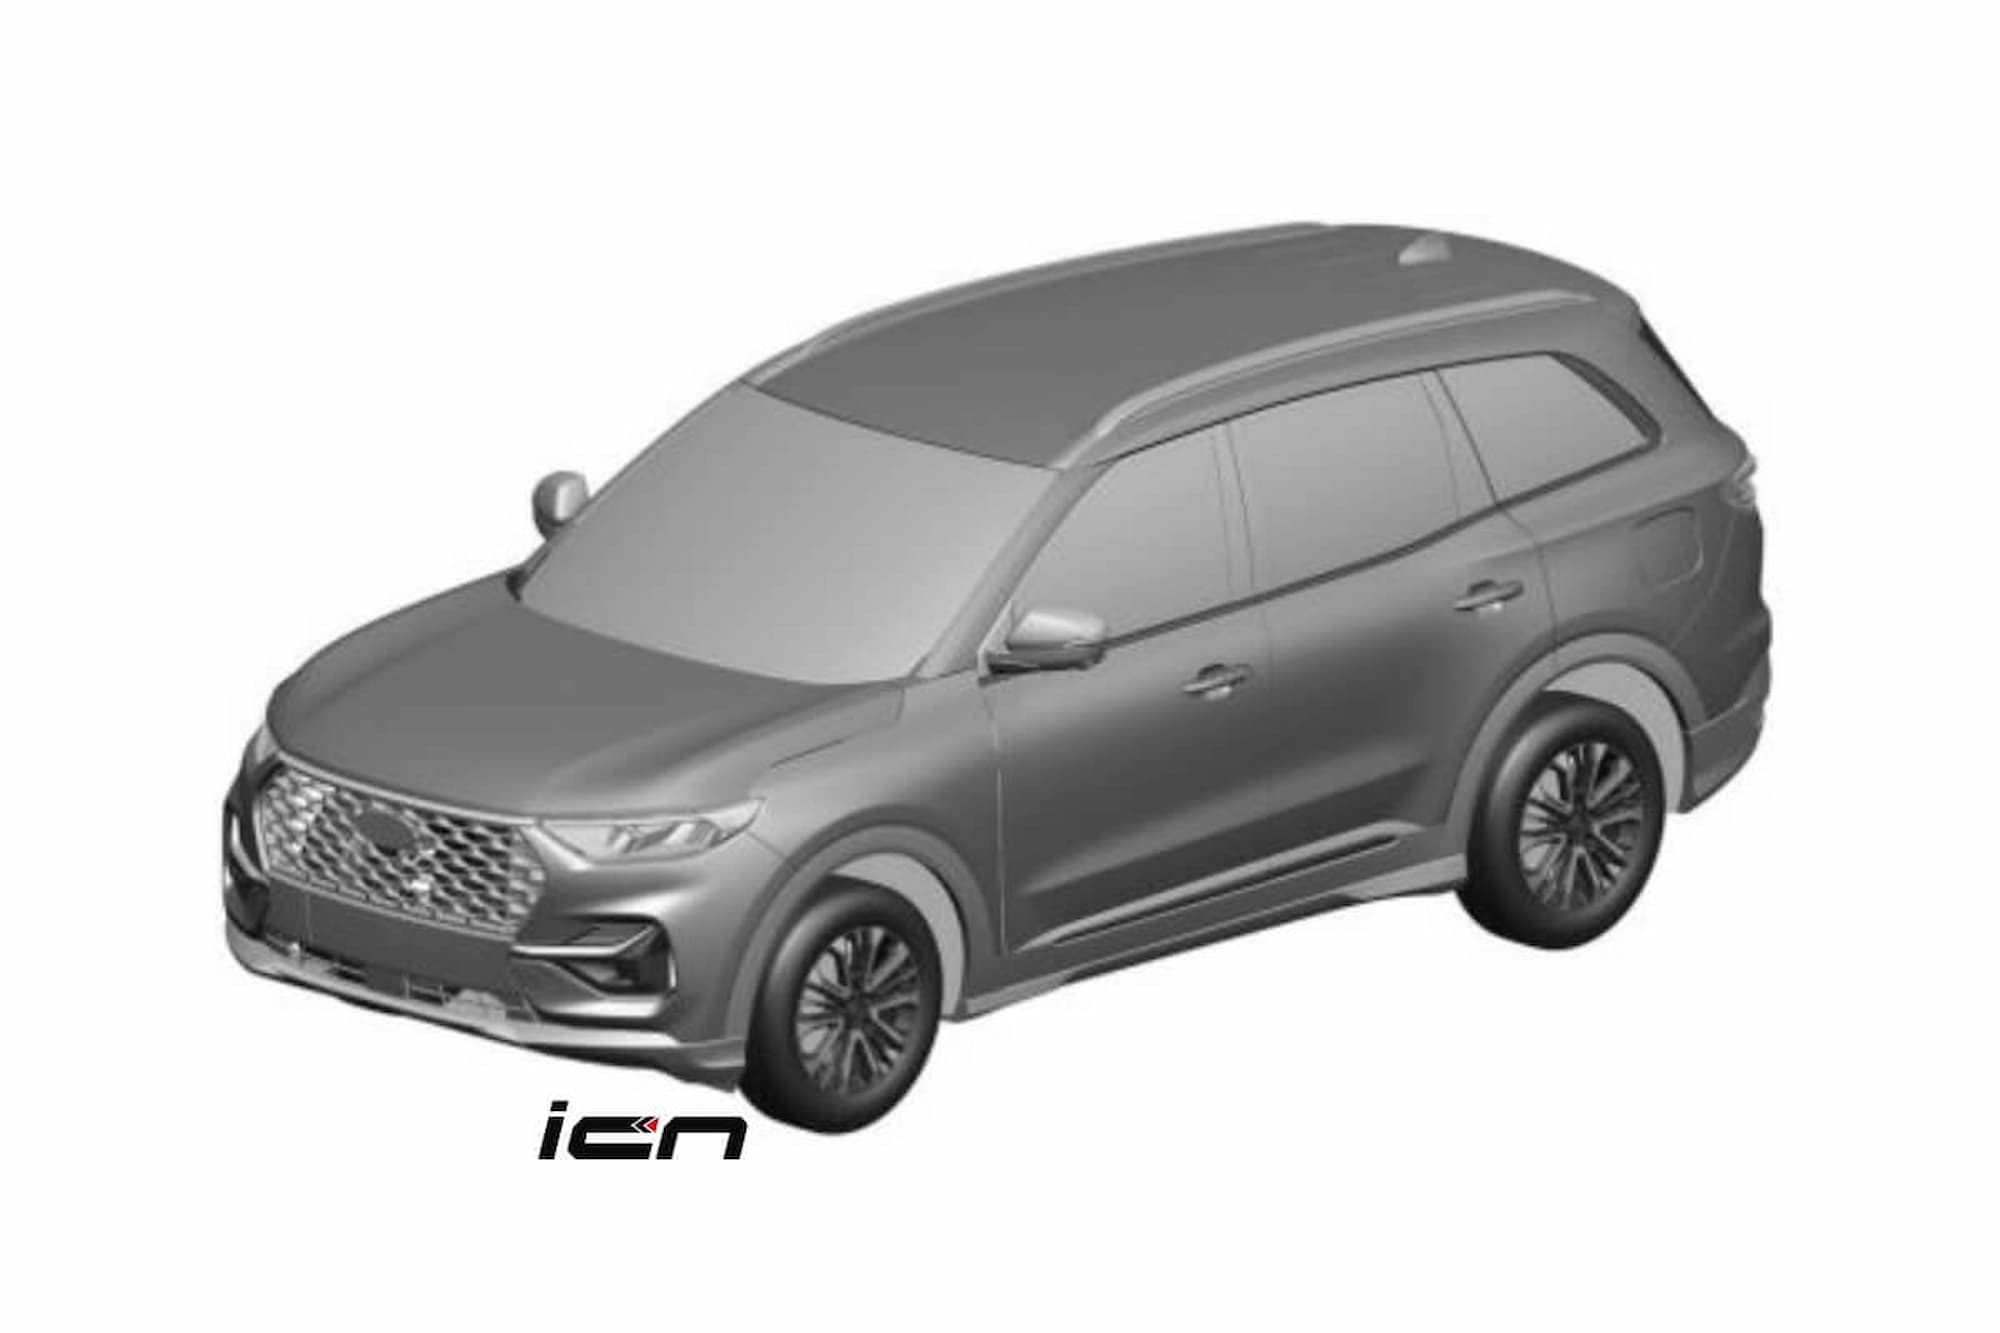 New Ford SUV leaked